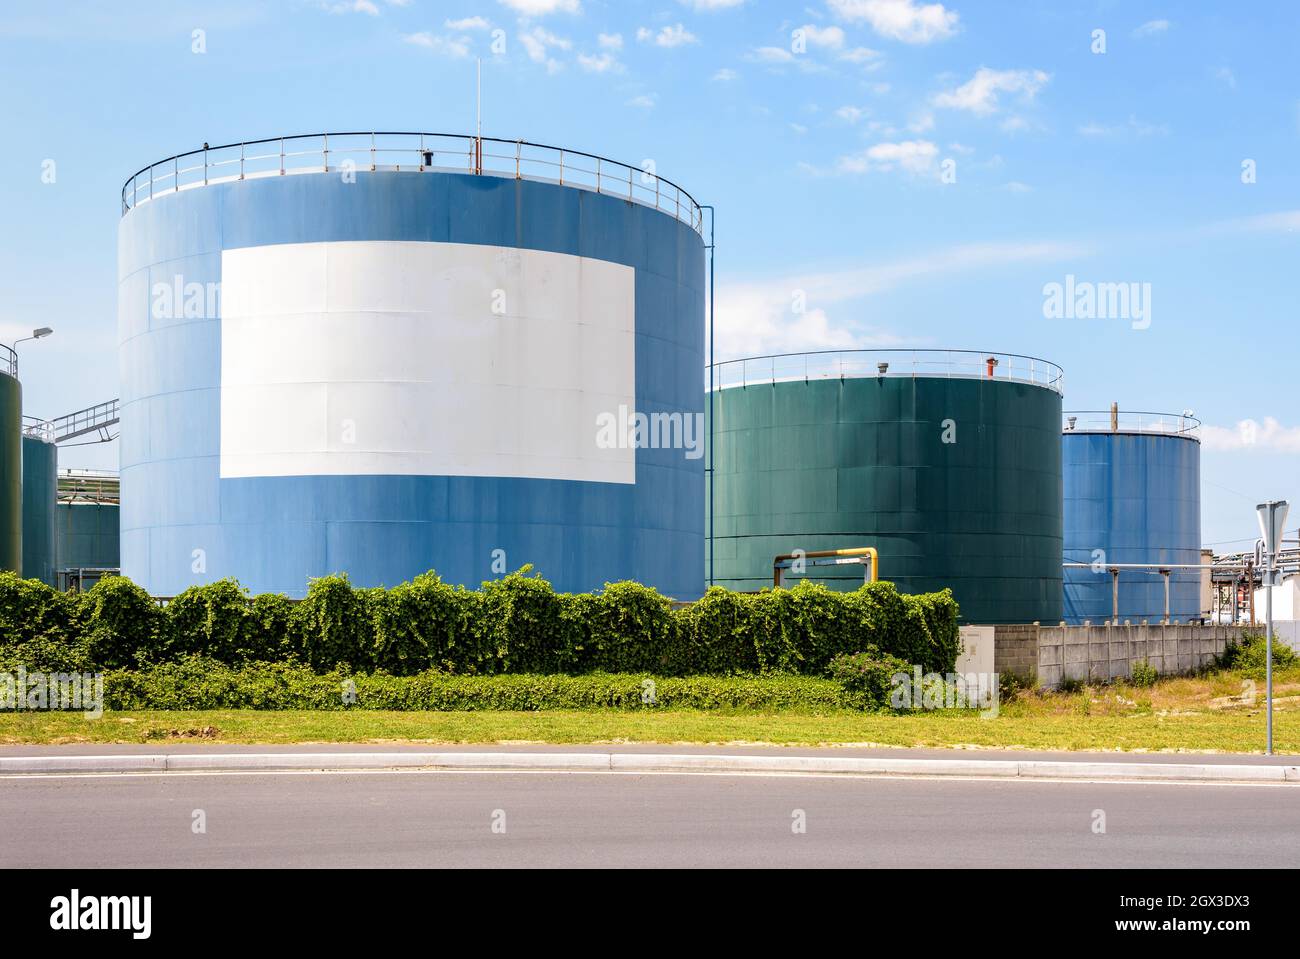 Large coloured storage tanks for oil and fuel in a tank farm with a white blank copy space under a blue sky. Stock Photo